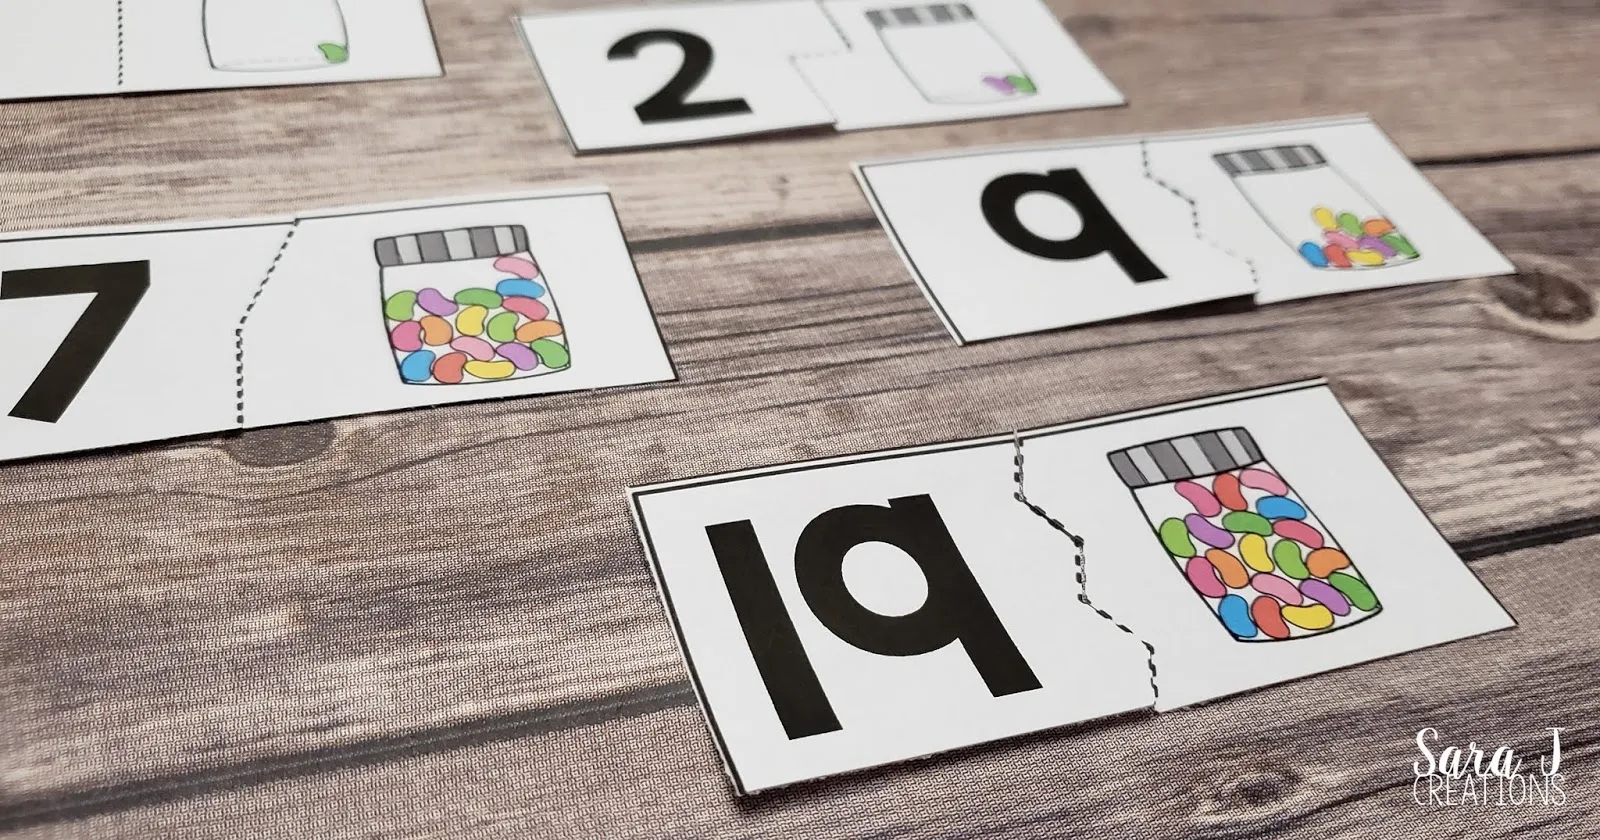 Help your preschool or kindergarten students practice counting the numbers 1-20 with these free candy counting puzzles. These printables make an easy to use activity for centers, sensory bins, small group play, math time and more.